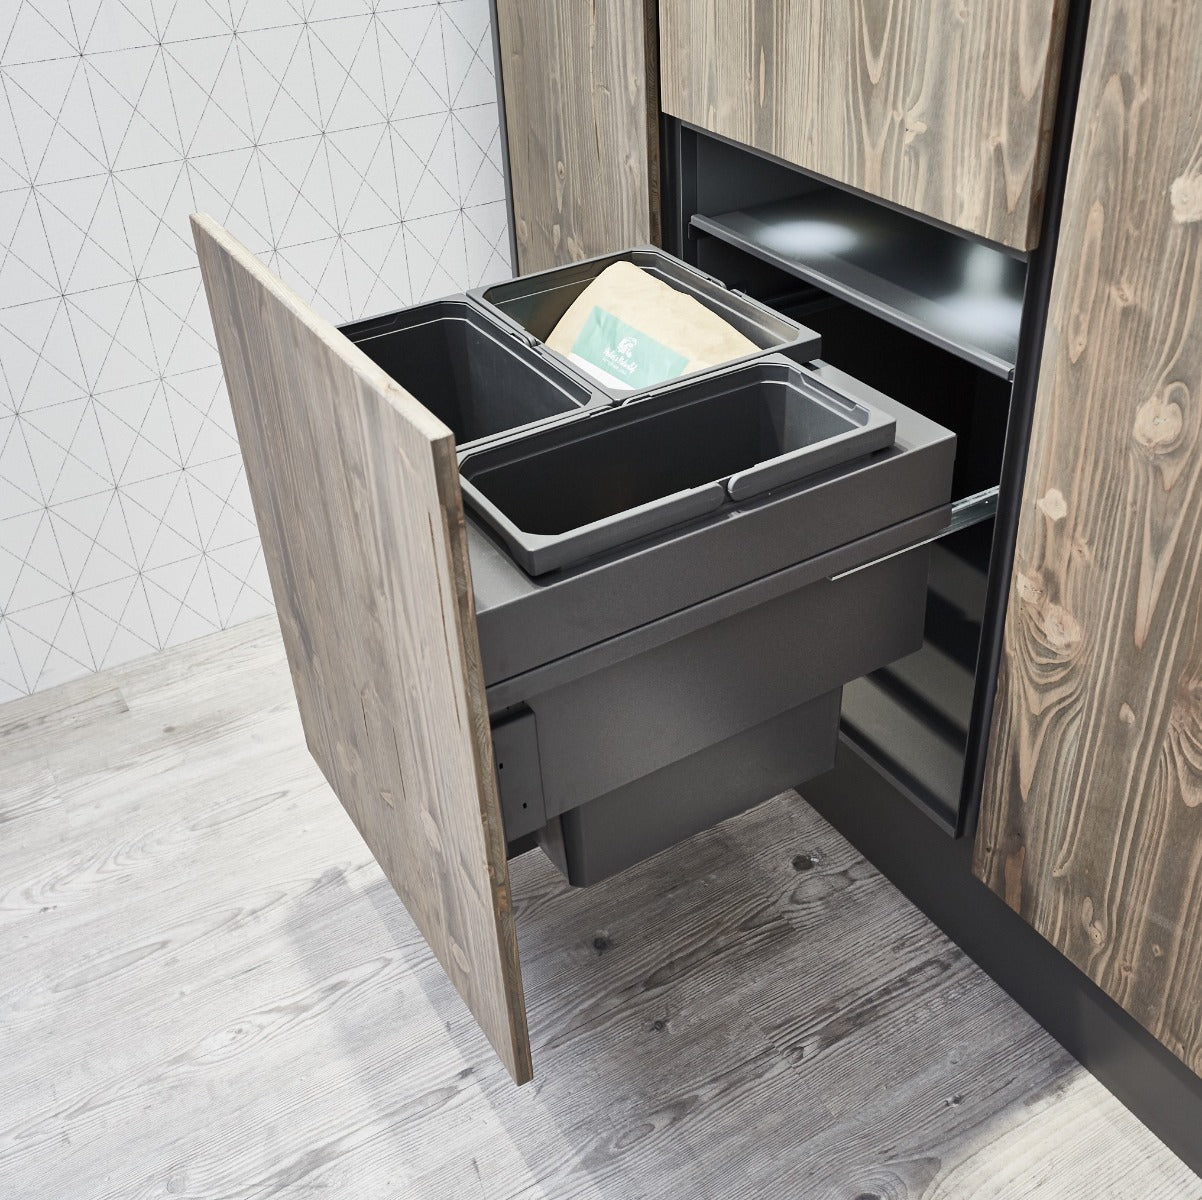 A lava grey Vauth-Sagel in-cupboard kitchen bin with three compartments for separating waste and recycling.